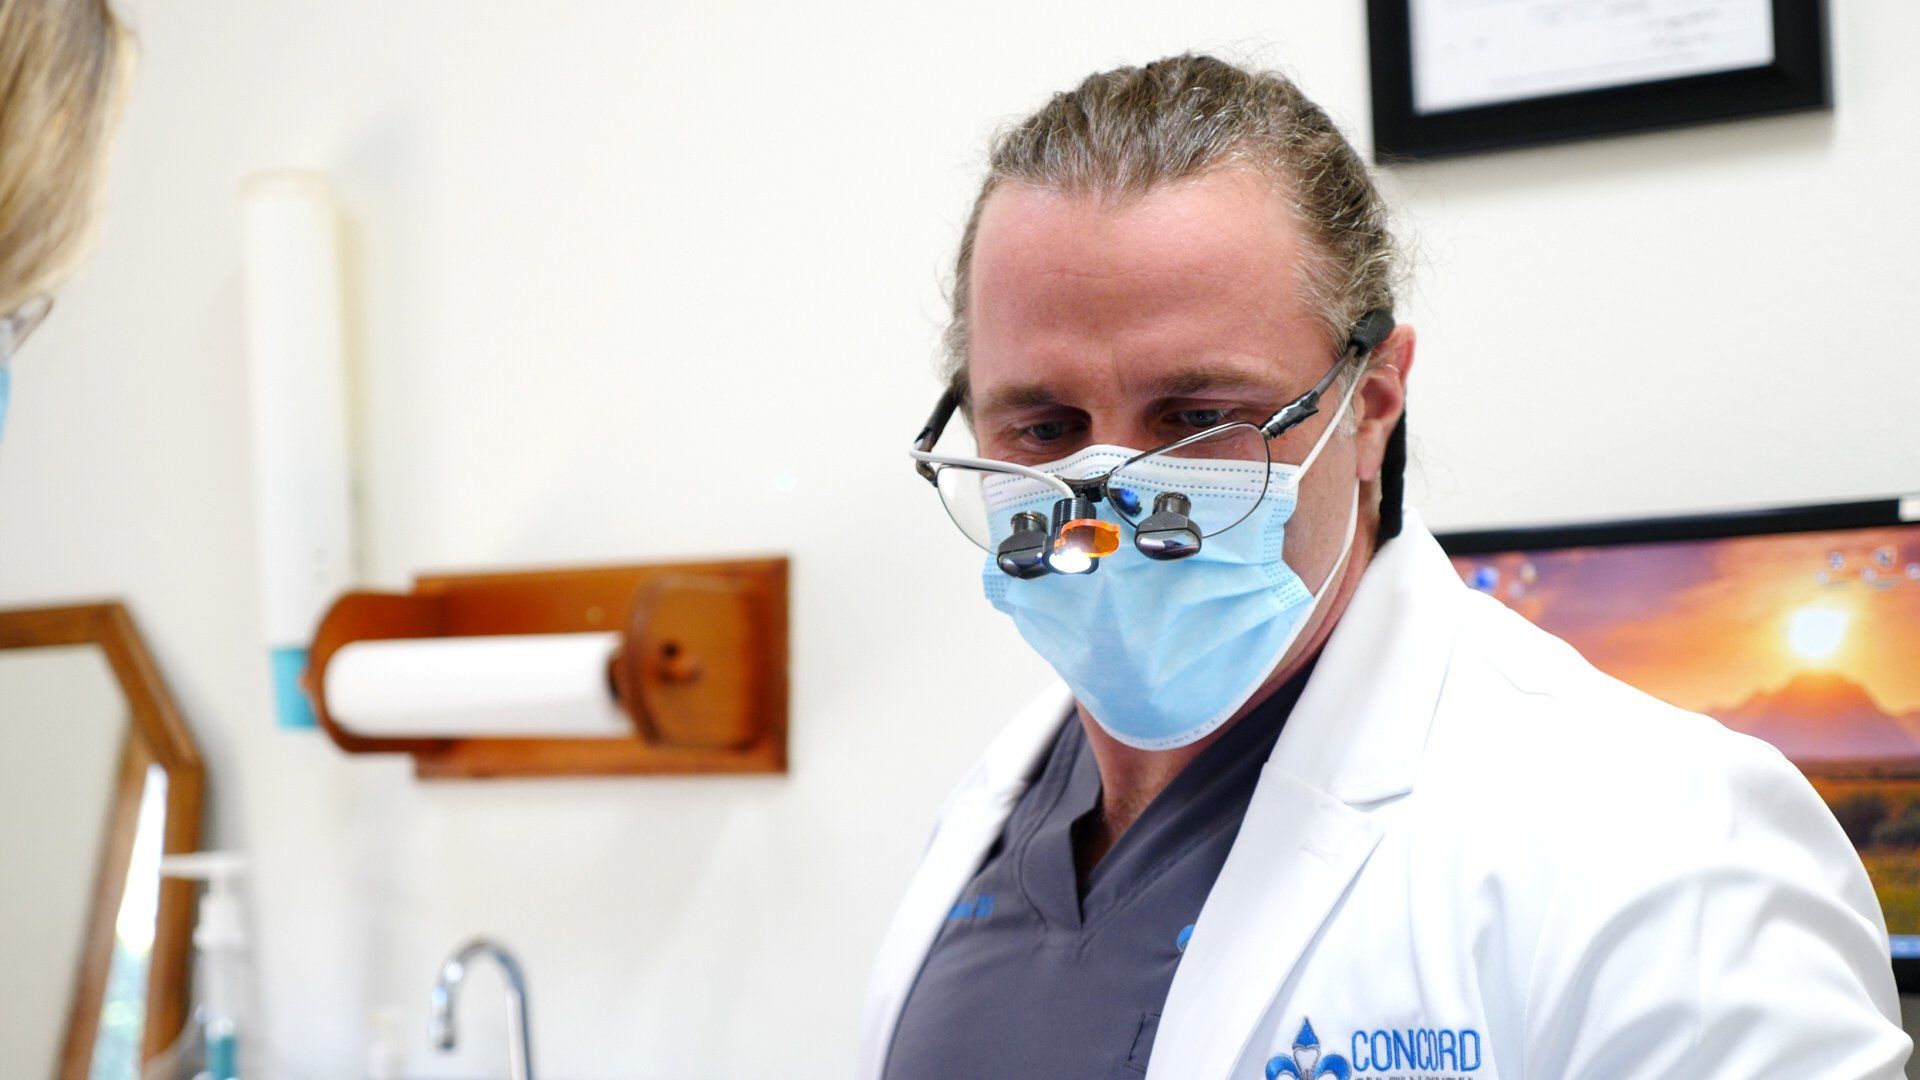 dental services Algiers la | Dentist in New Orleans working on patient